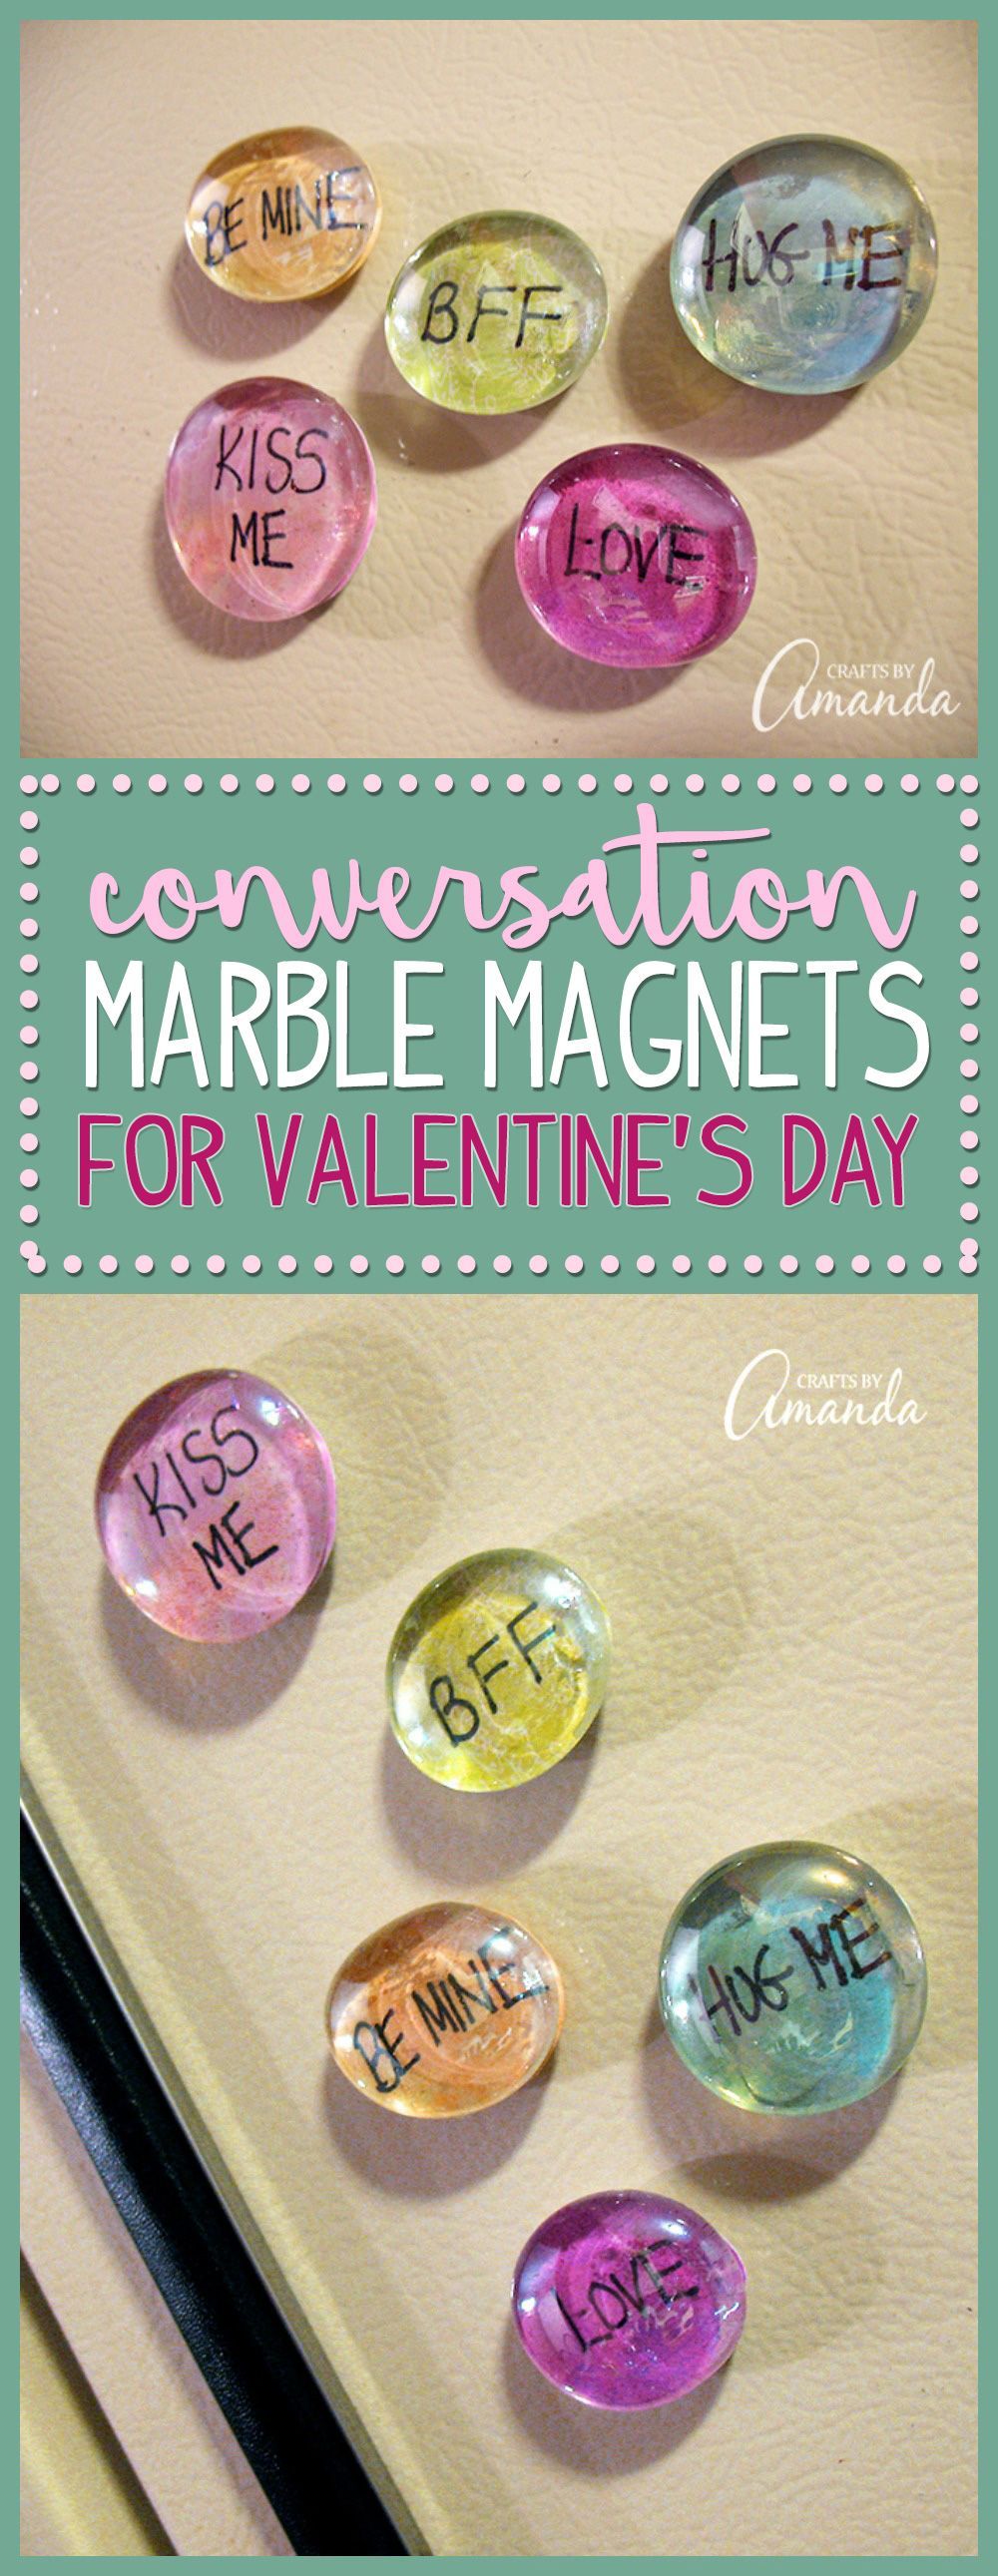 These conversation marble magnets are a simple craft for Valentine's Day. They take only minutes to make and are an inexpensive gift for neighbors, friends and teachers. Inspired by conversation hearts, these glass gem magnets are a great Valentine's Day project for adults and for kids. -   25 simple crafts gifts
 ideas